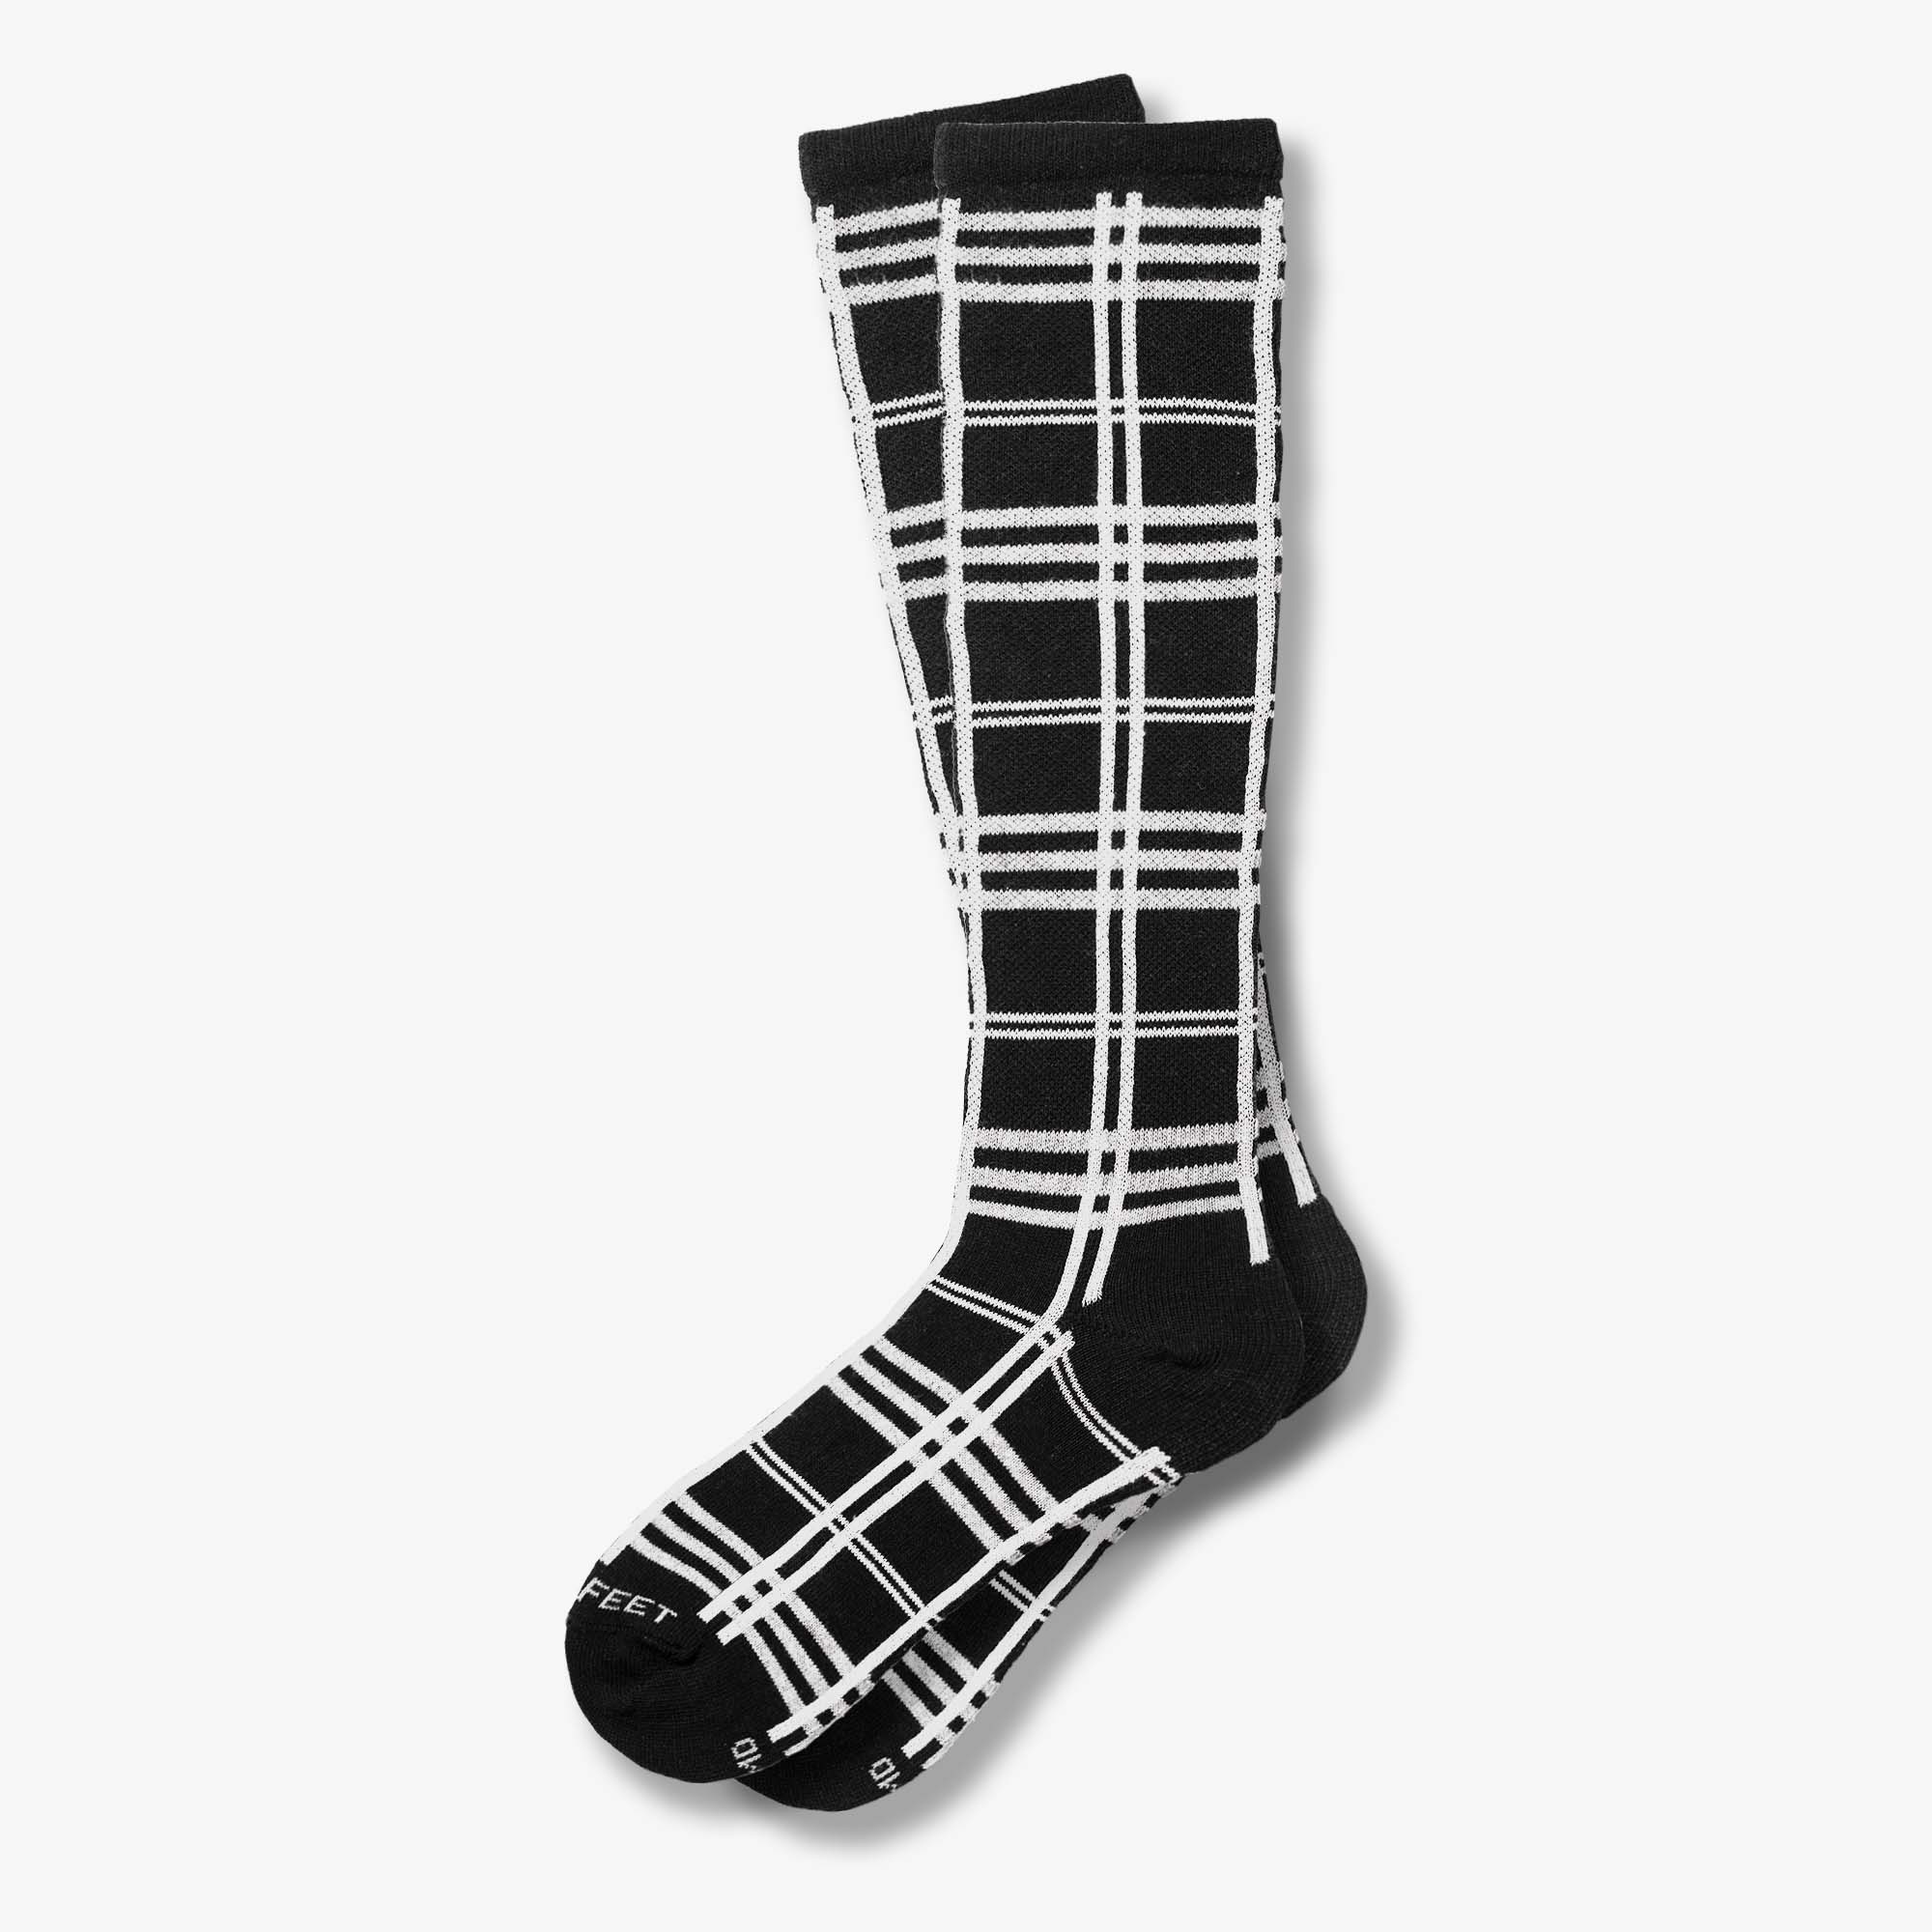 Black and white plaid knee highs